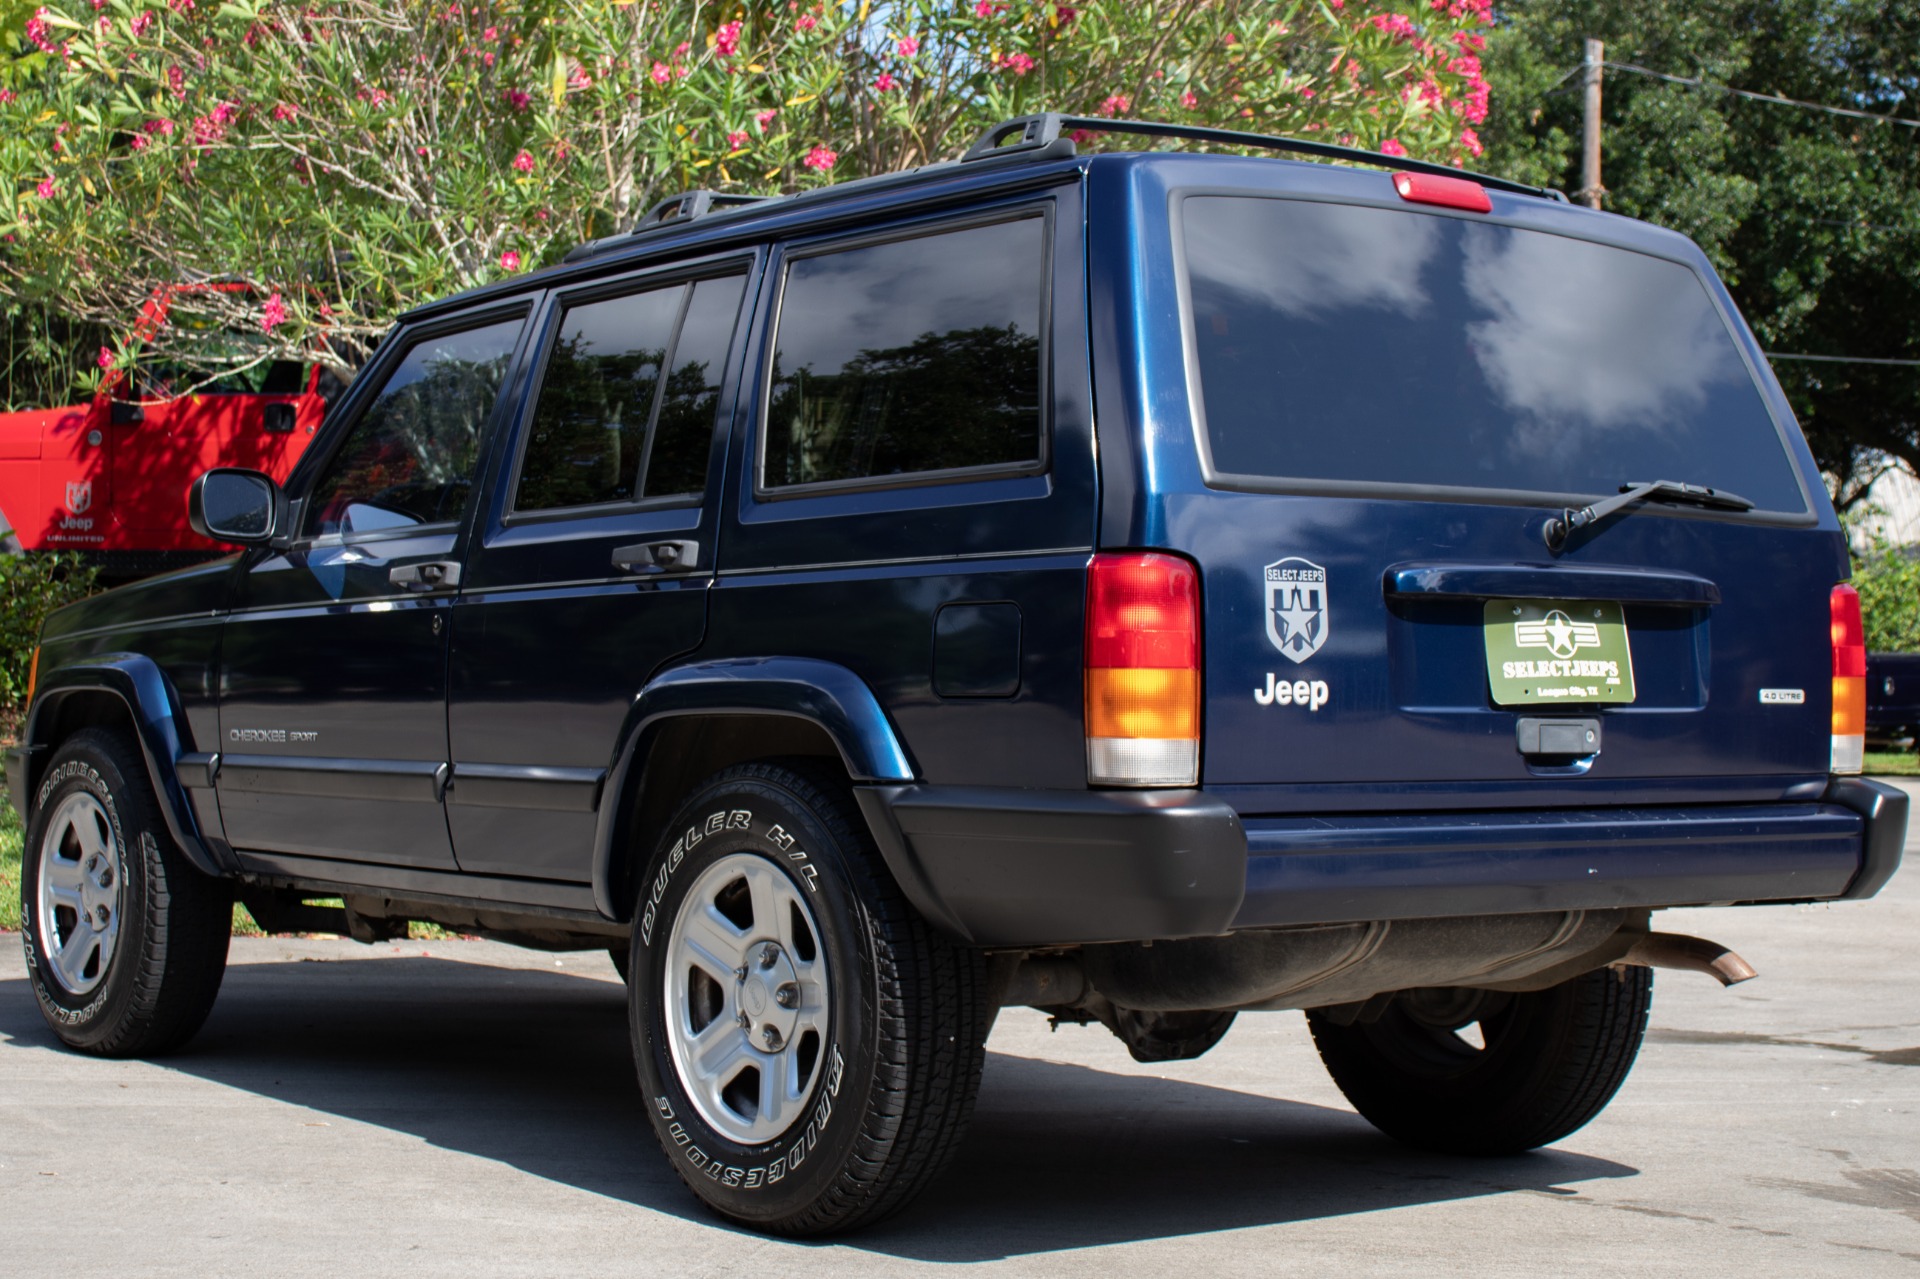 Used 01 Jeep Cherokee Sport For Sale 6 995 Select Jeeps Inc Stock